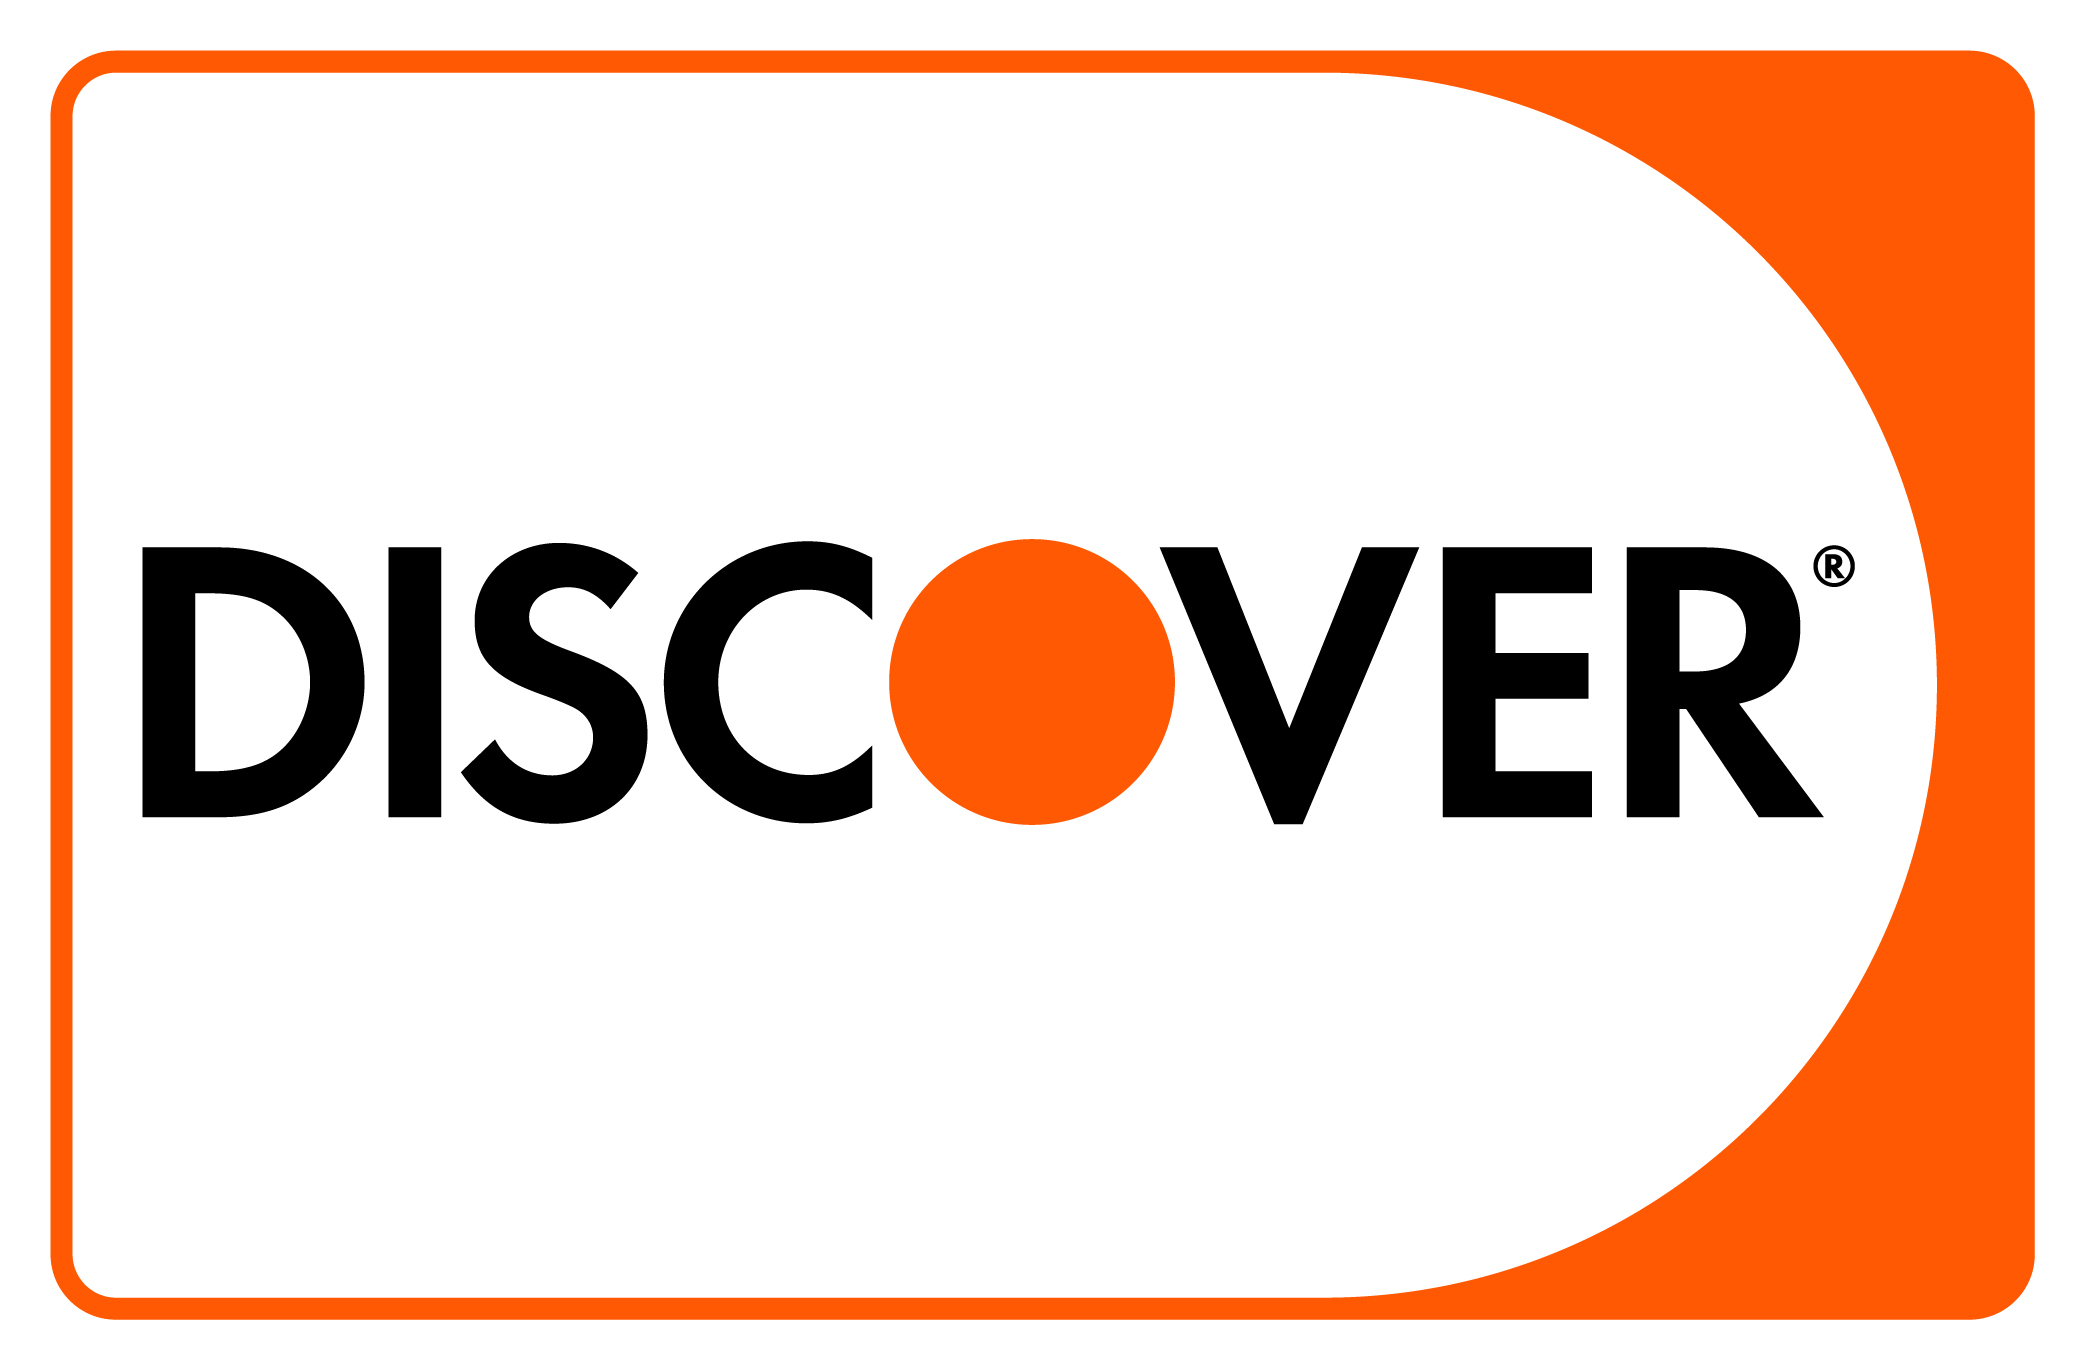 Discover global network Brand Guidelines logo